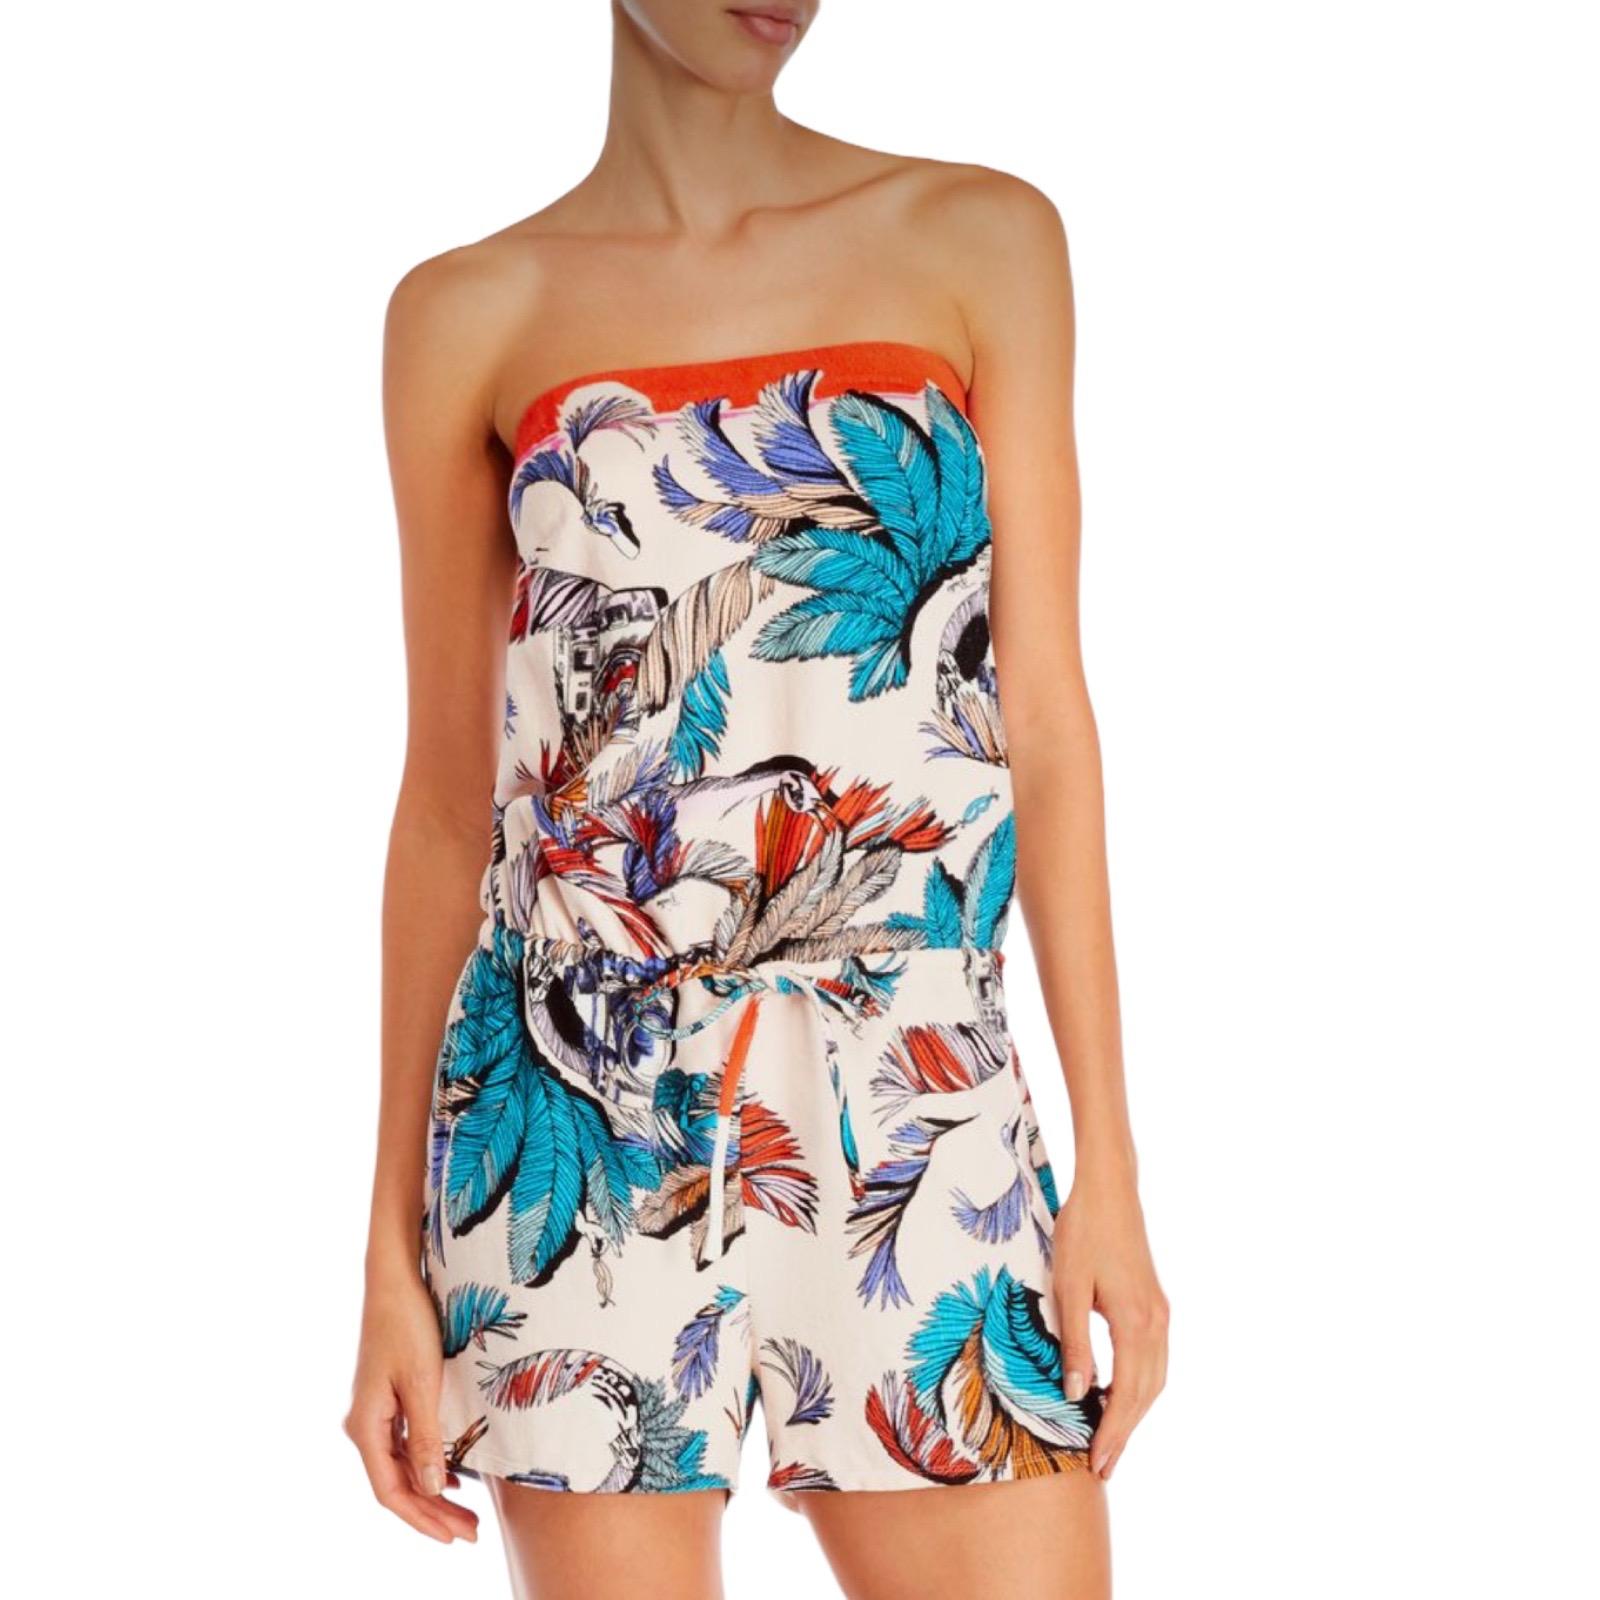 NEW Emilio Pucci Softest Terry Towel Print Romper Overall Jumpsuit Playsuit 40 For Sale 1